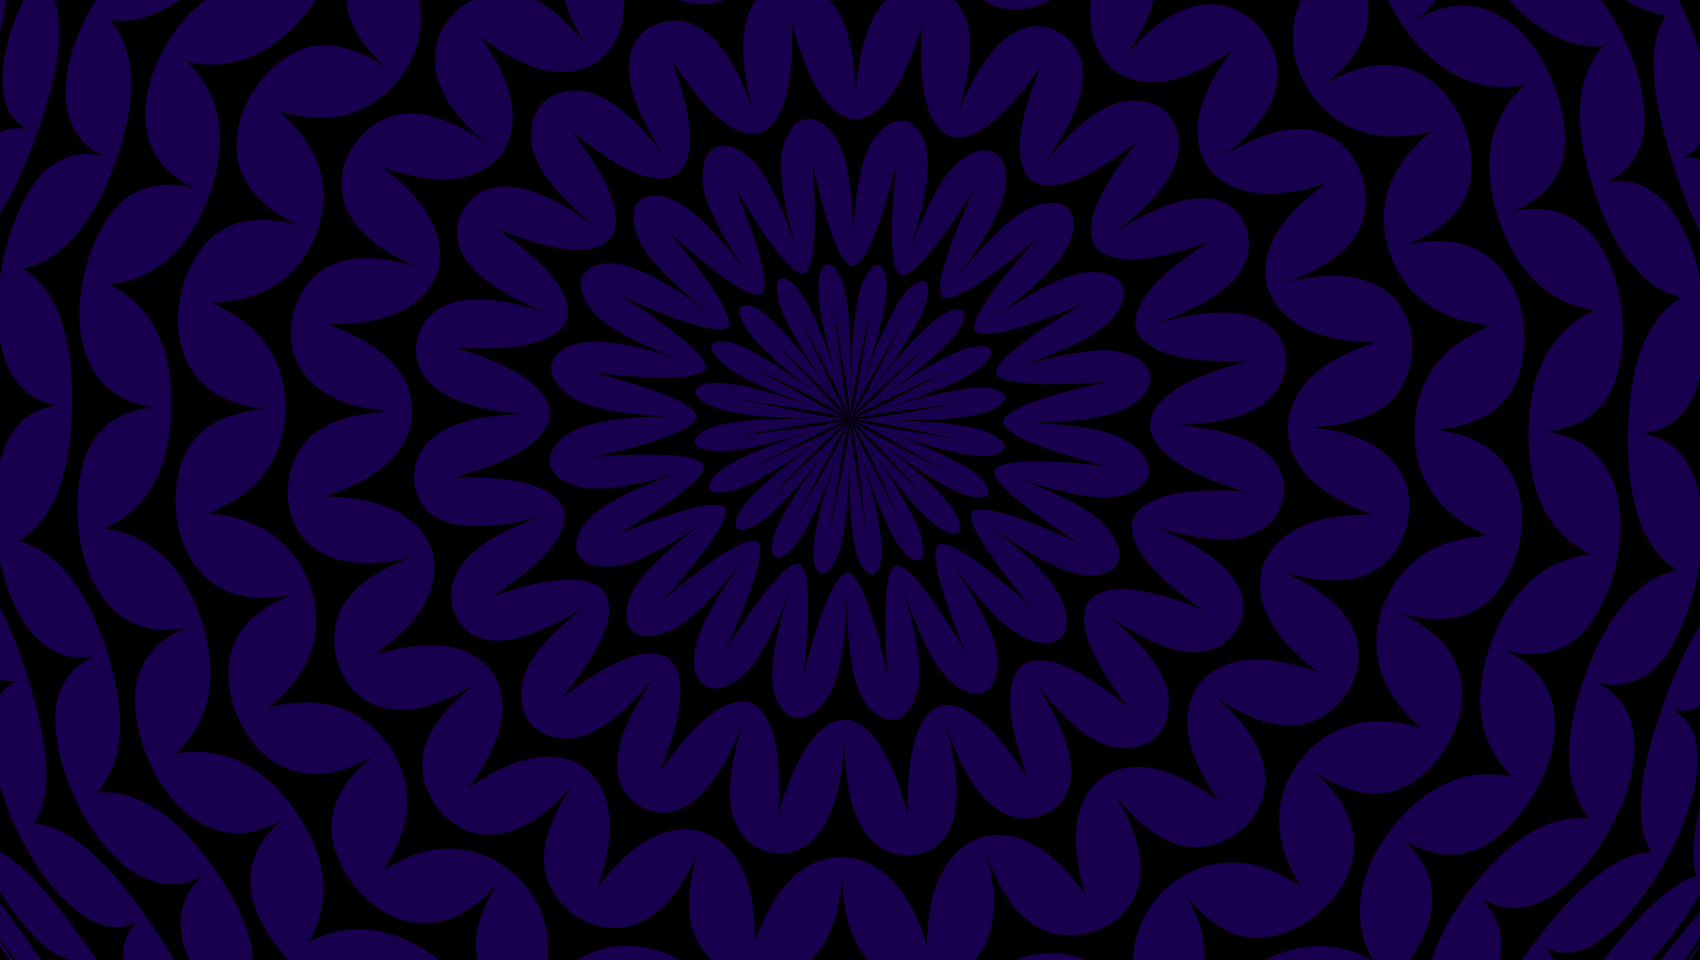 A purple and black spiral pattern on a black background.